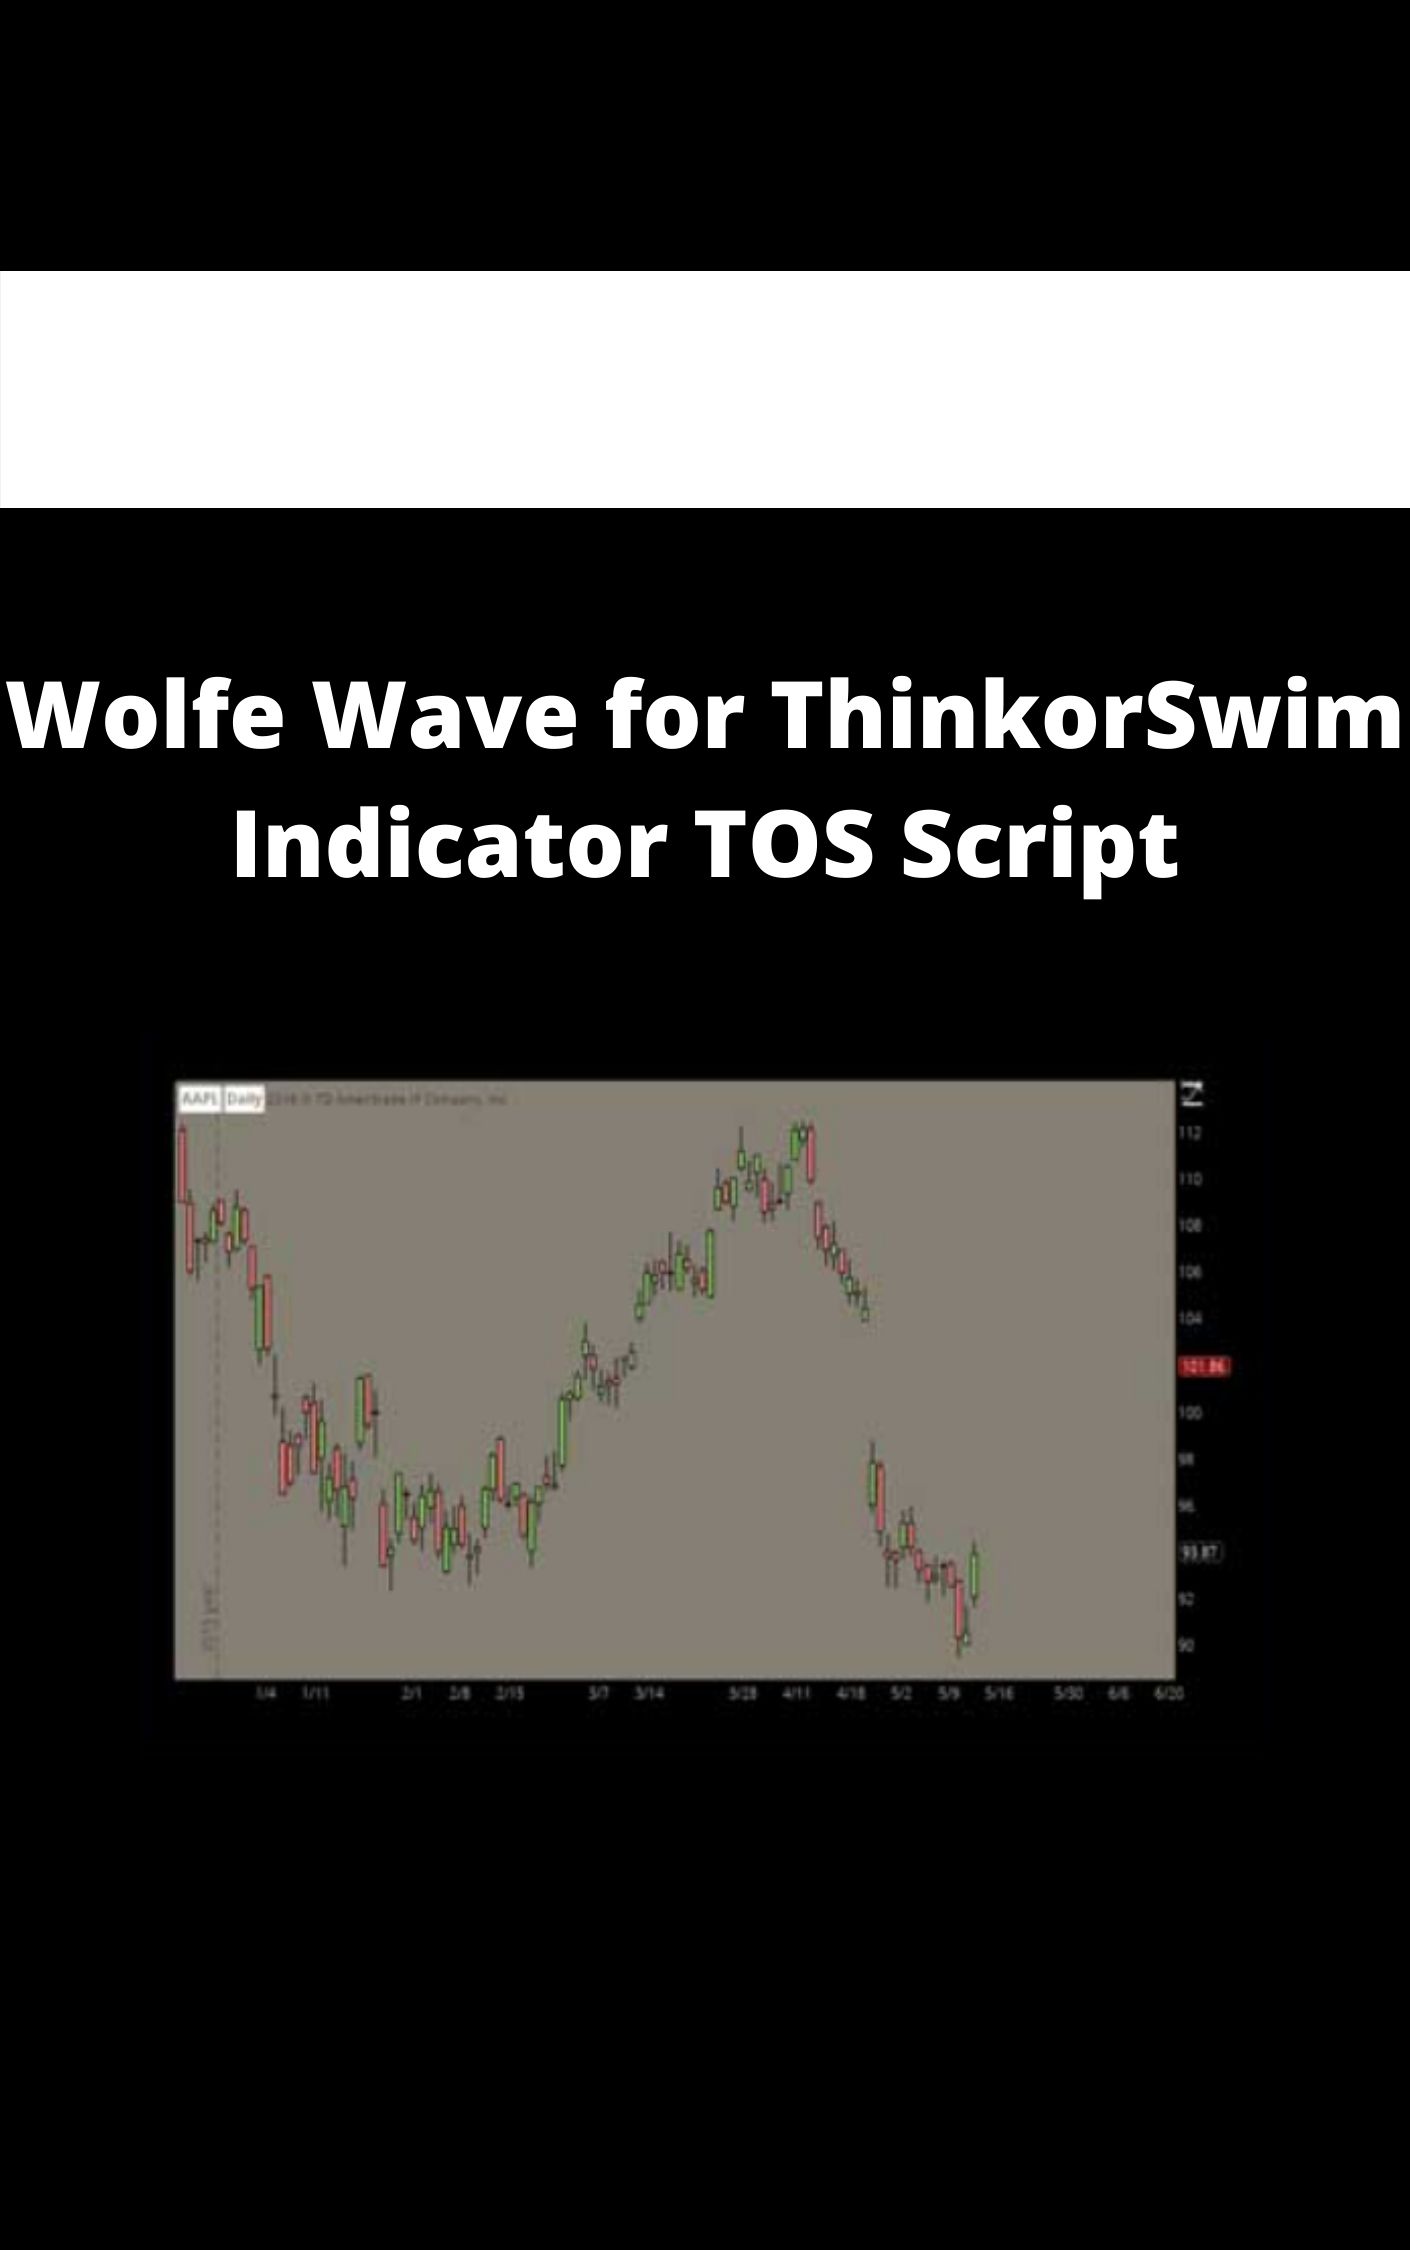 Wolfe Wave for ThinkorSwim Indicator TOS Script